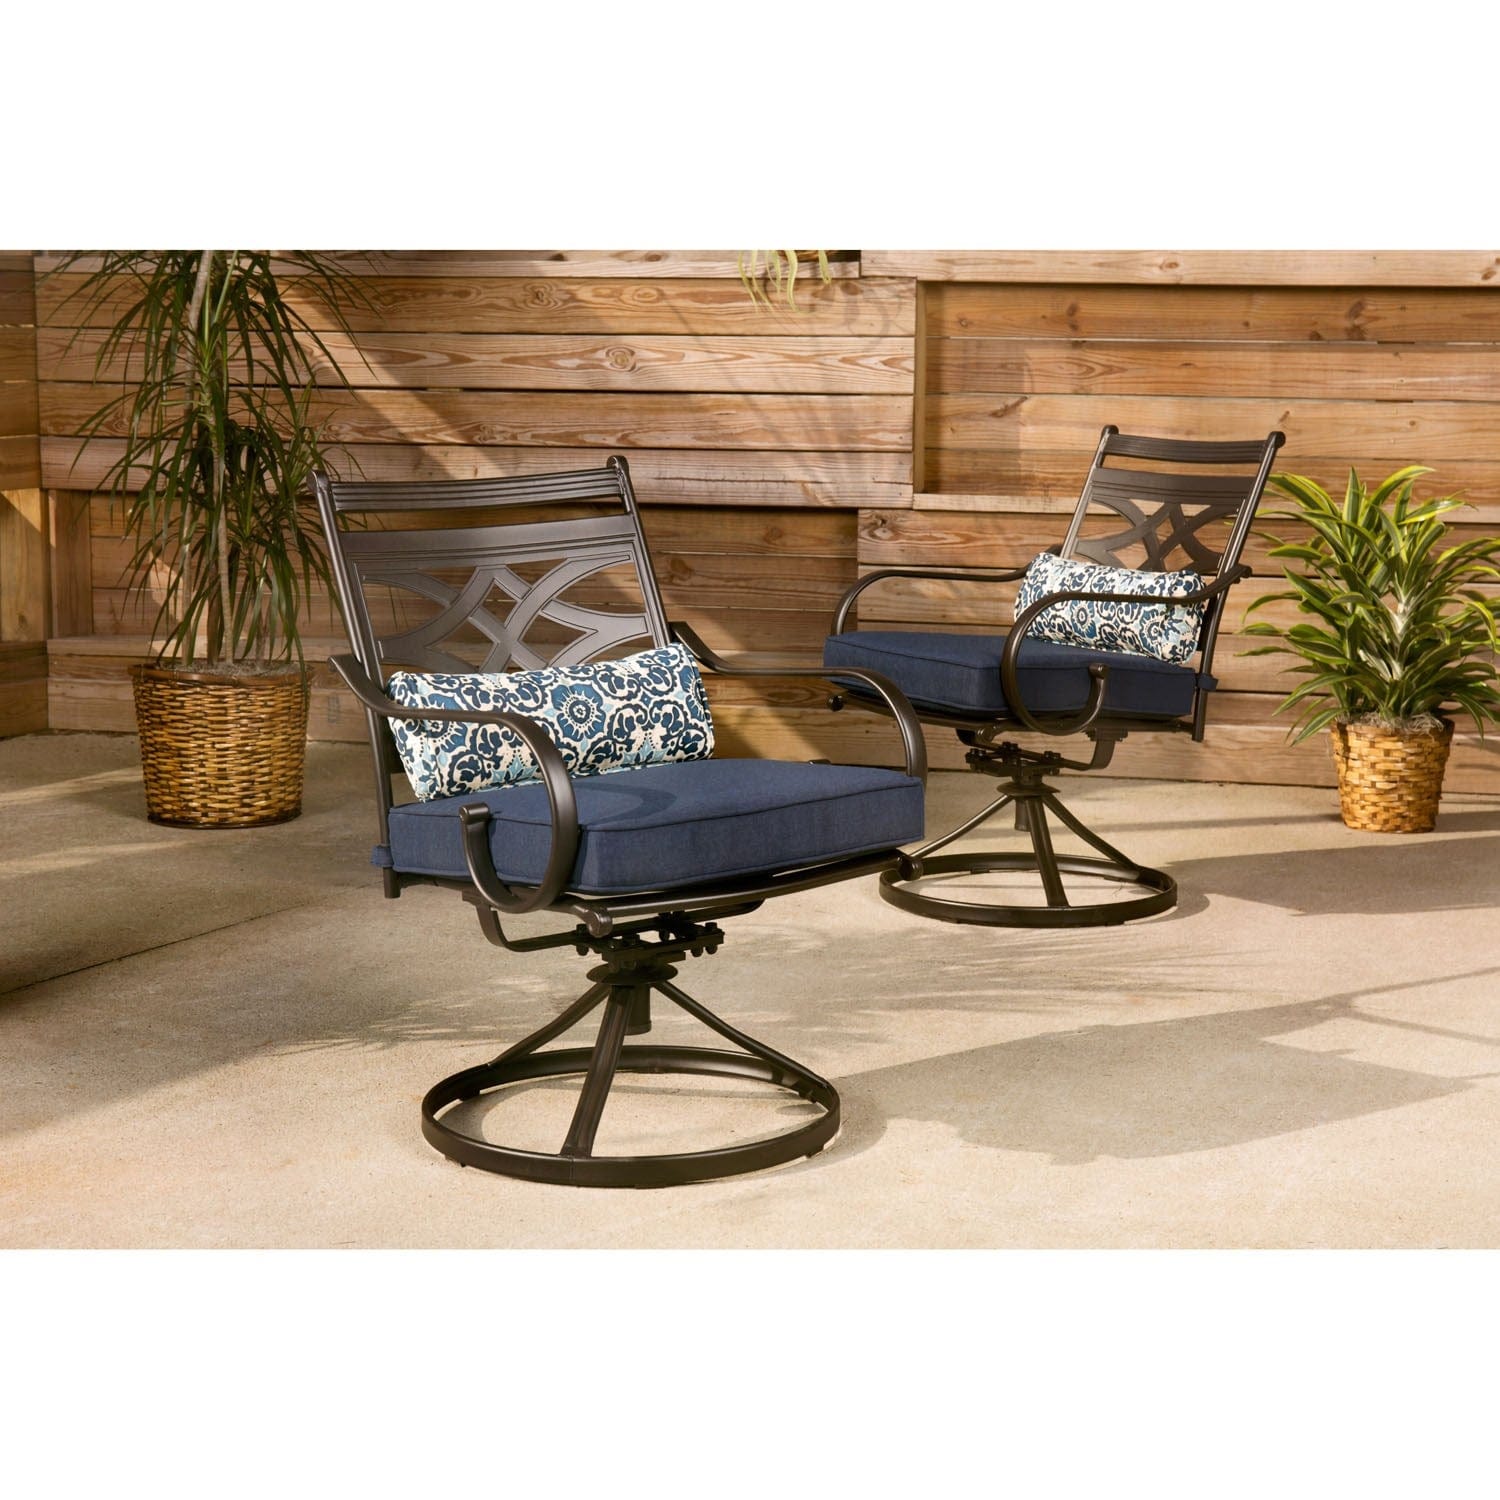 Hanover Outdoor Dining Set Hanover Montclair 5-Piece Patio Dining Set in Navy Blue with 4 Swivel Rockers and a 40-Inch Square Table | MCLRDN5PCSQSW4-NVY